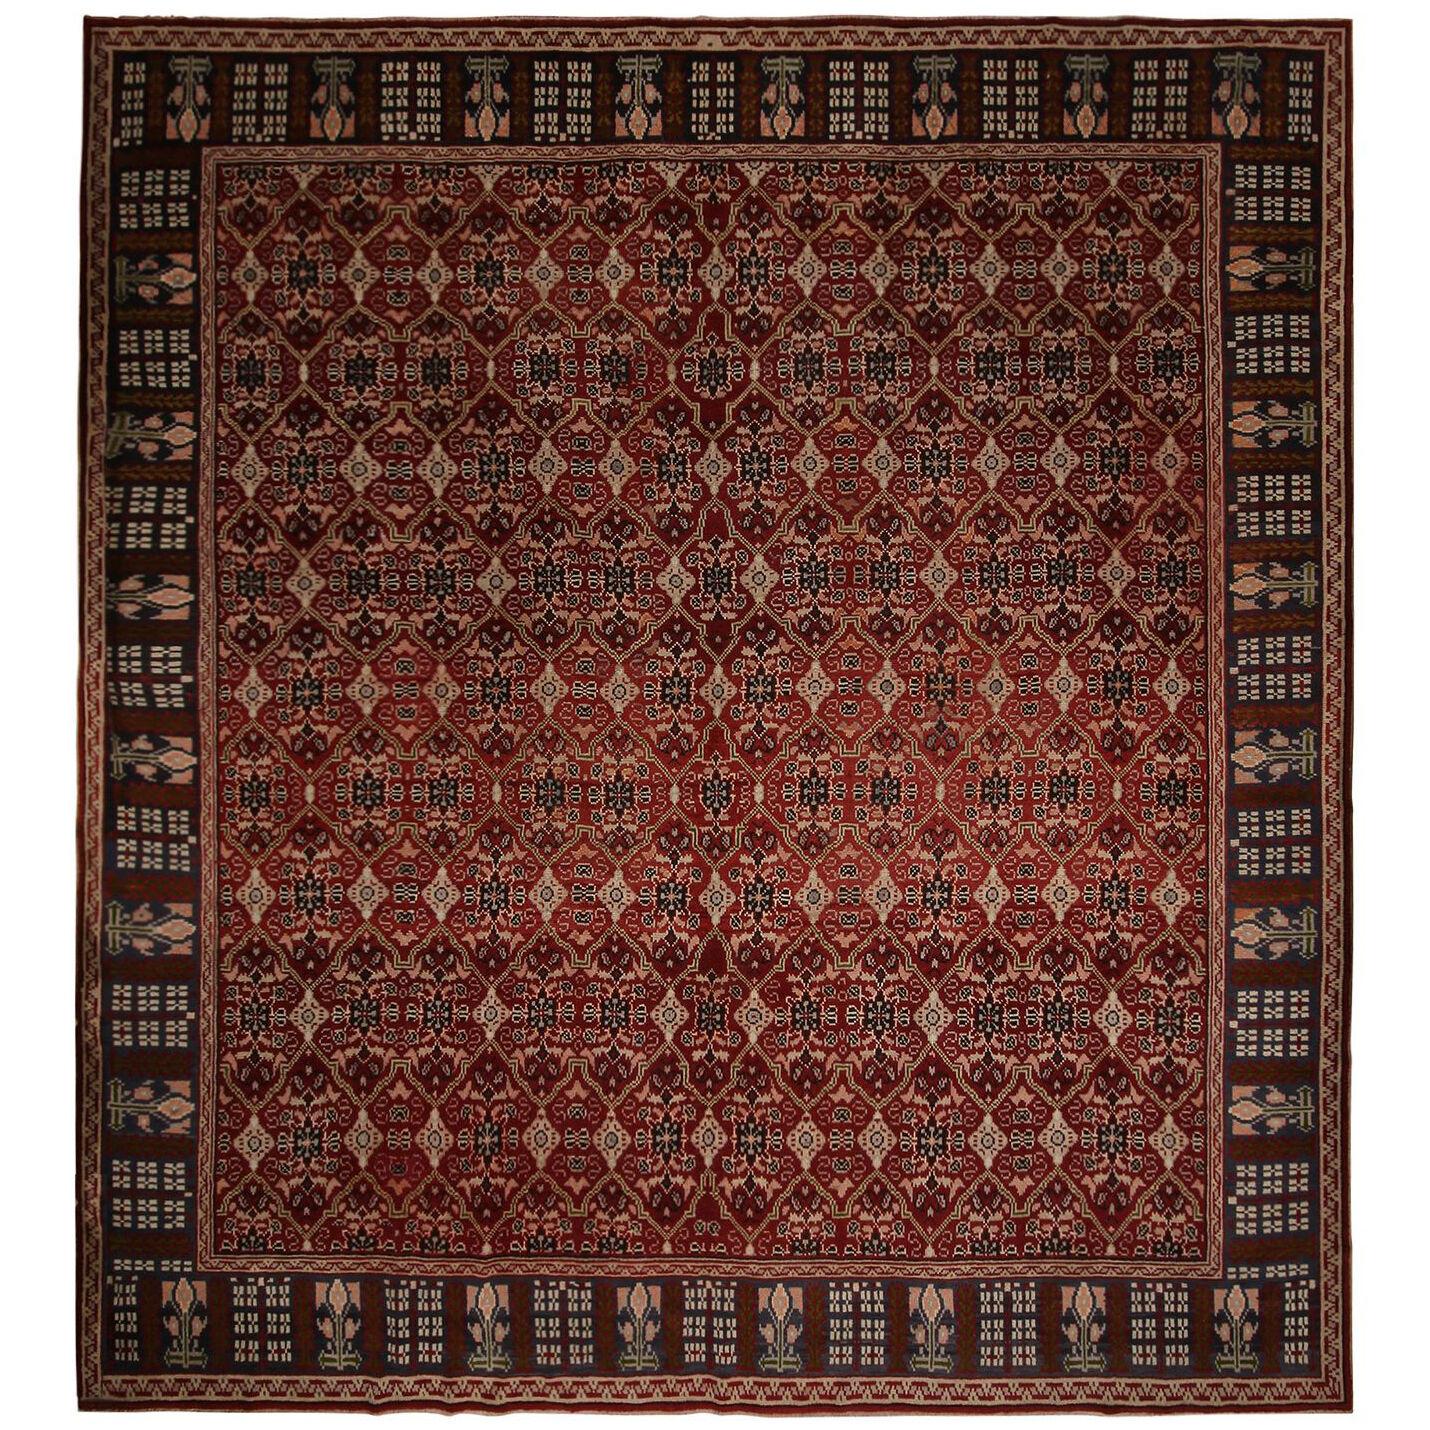 Antique Geometric Burgundy and Beige Wool Rug, Pink and Blue Accents